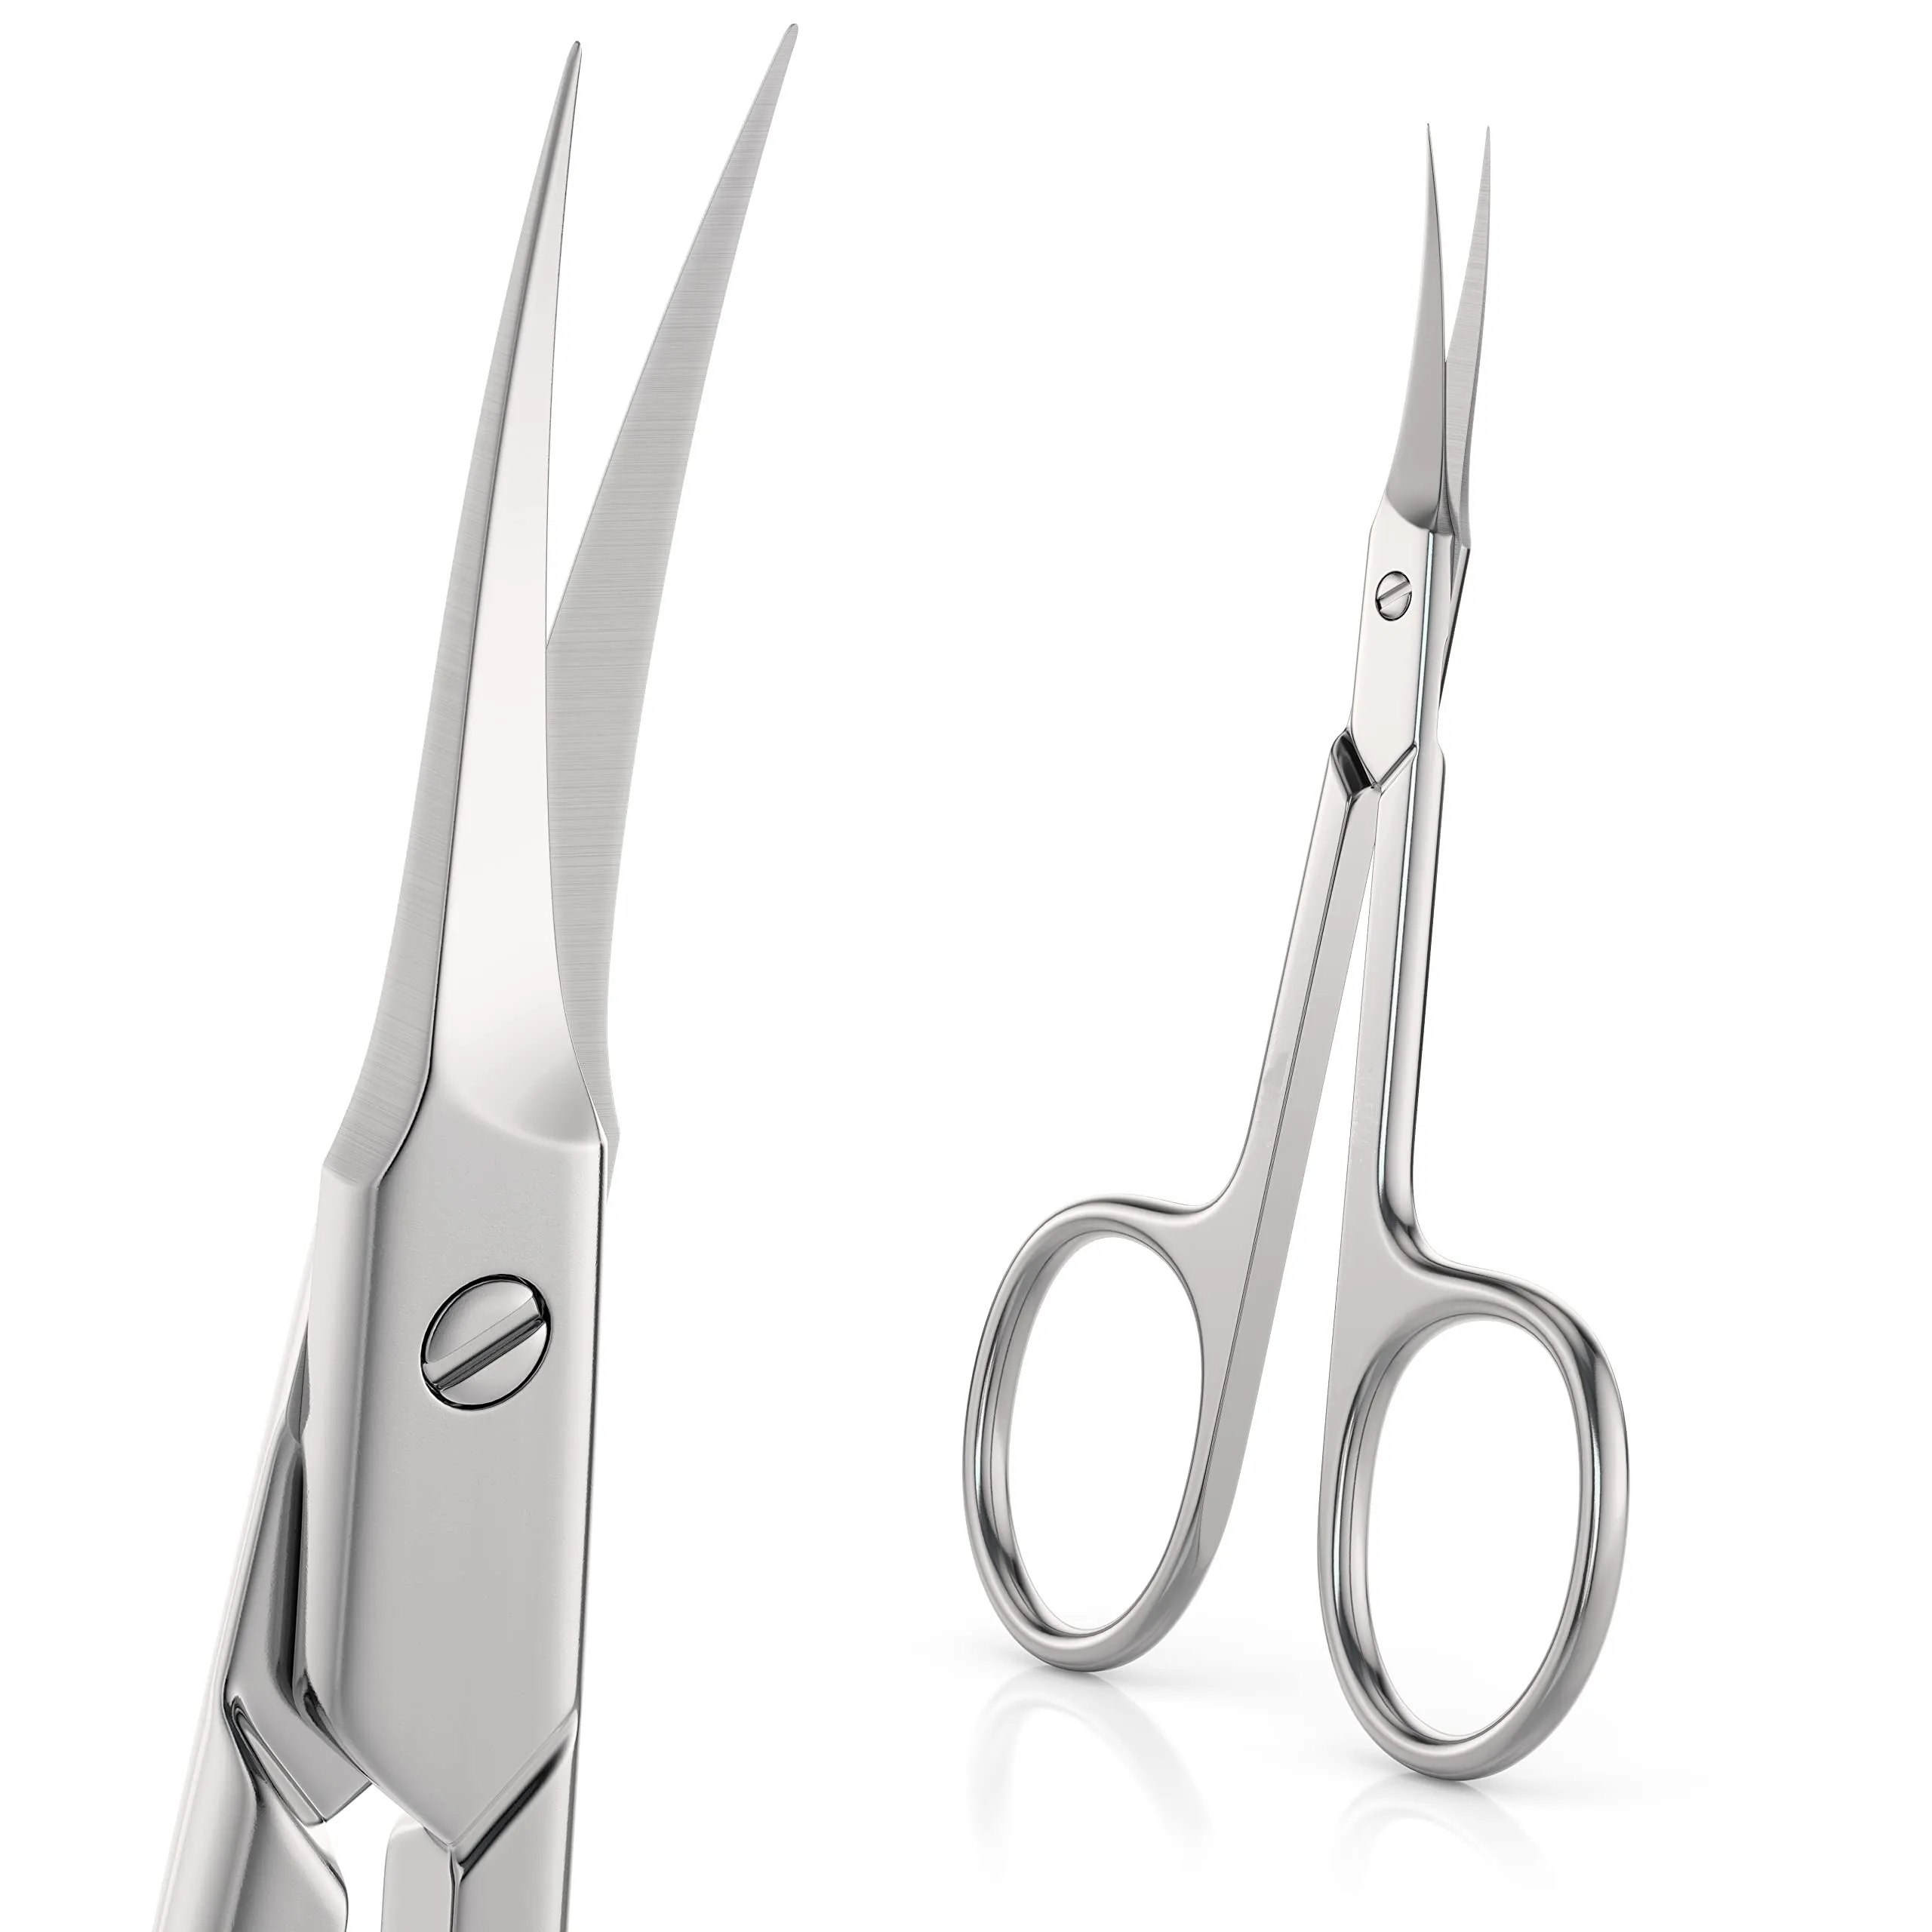 Manicure Scissors Professional Cuticle Cutter Trimmer Curved Tip Nail Pedicure Grooming Stainless Steel Dead Skin Remover